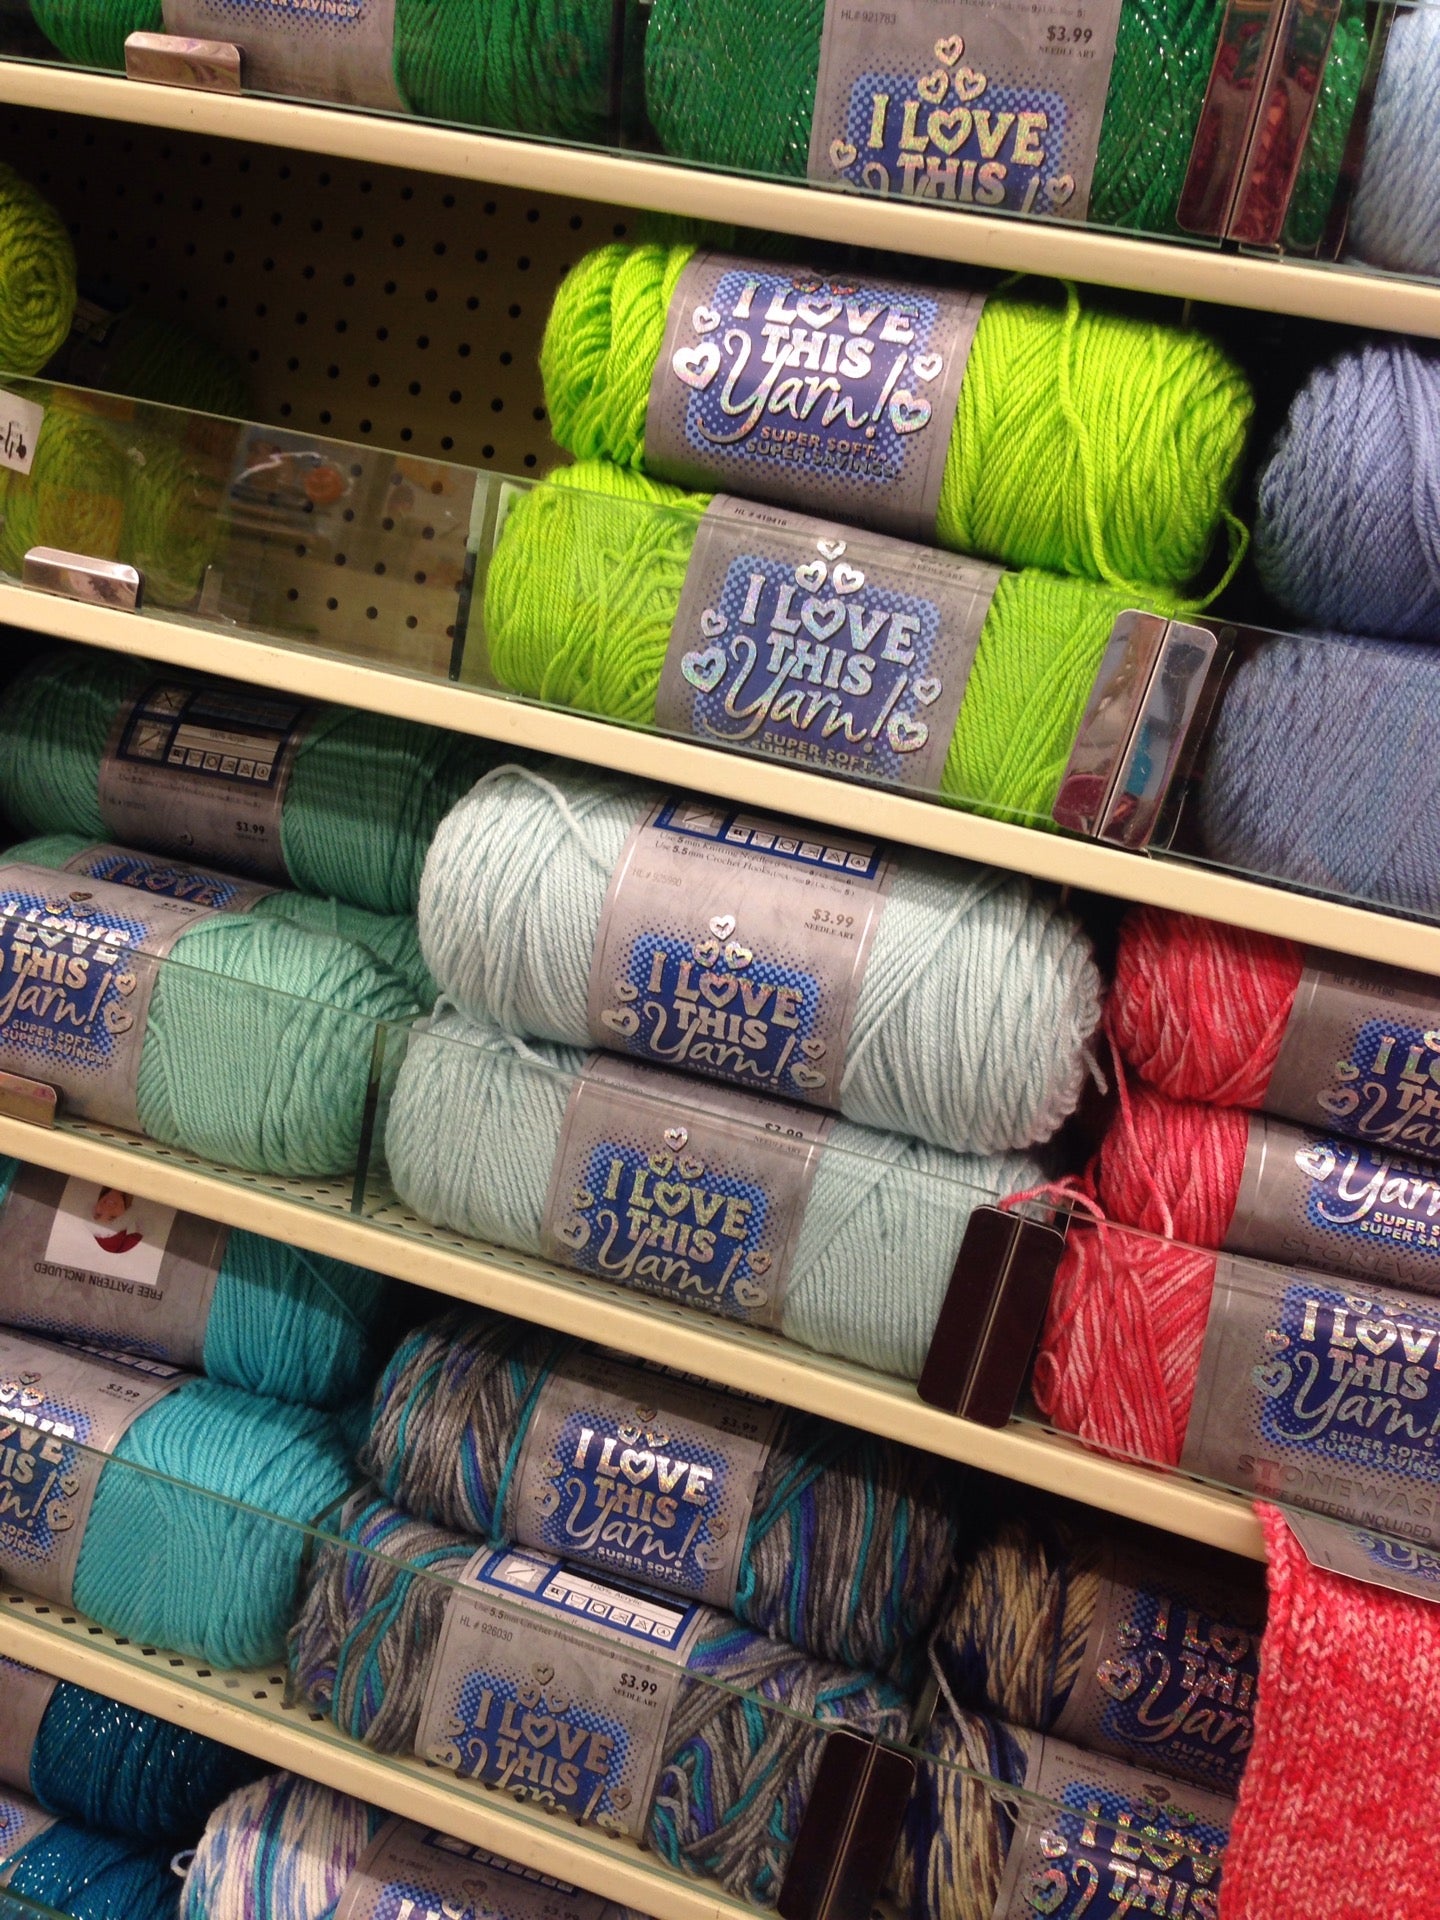 Hobby Lobby clearance yarn. Husband said I could get as much as I wanted  not that I need permission tho. $100 tax included 😍 : r/crochet